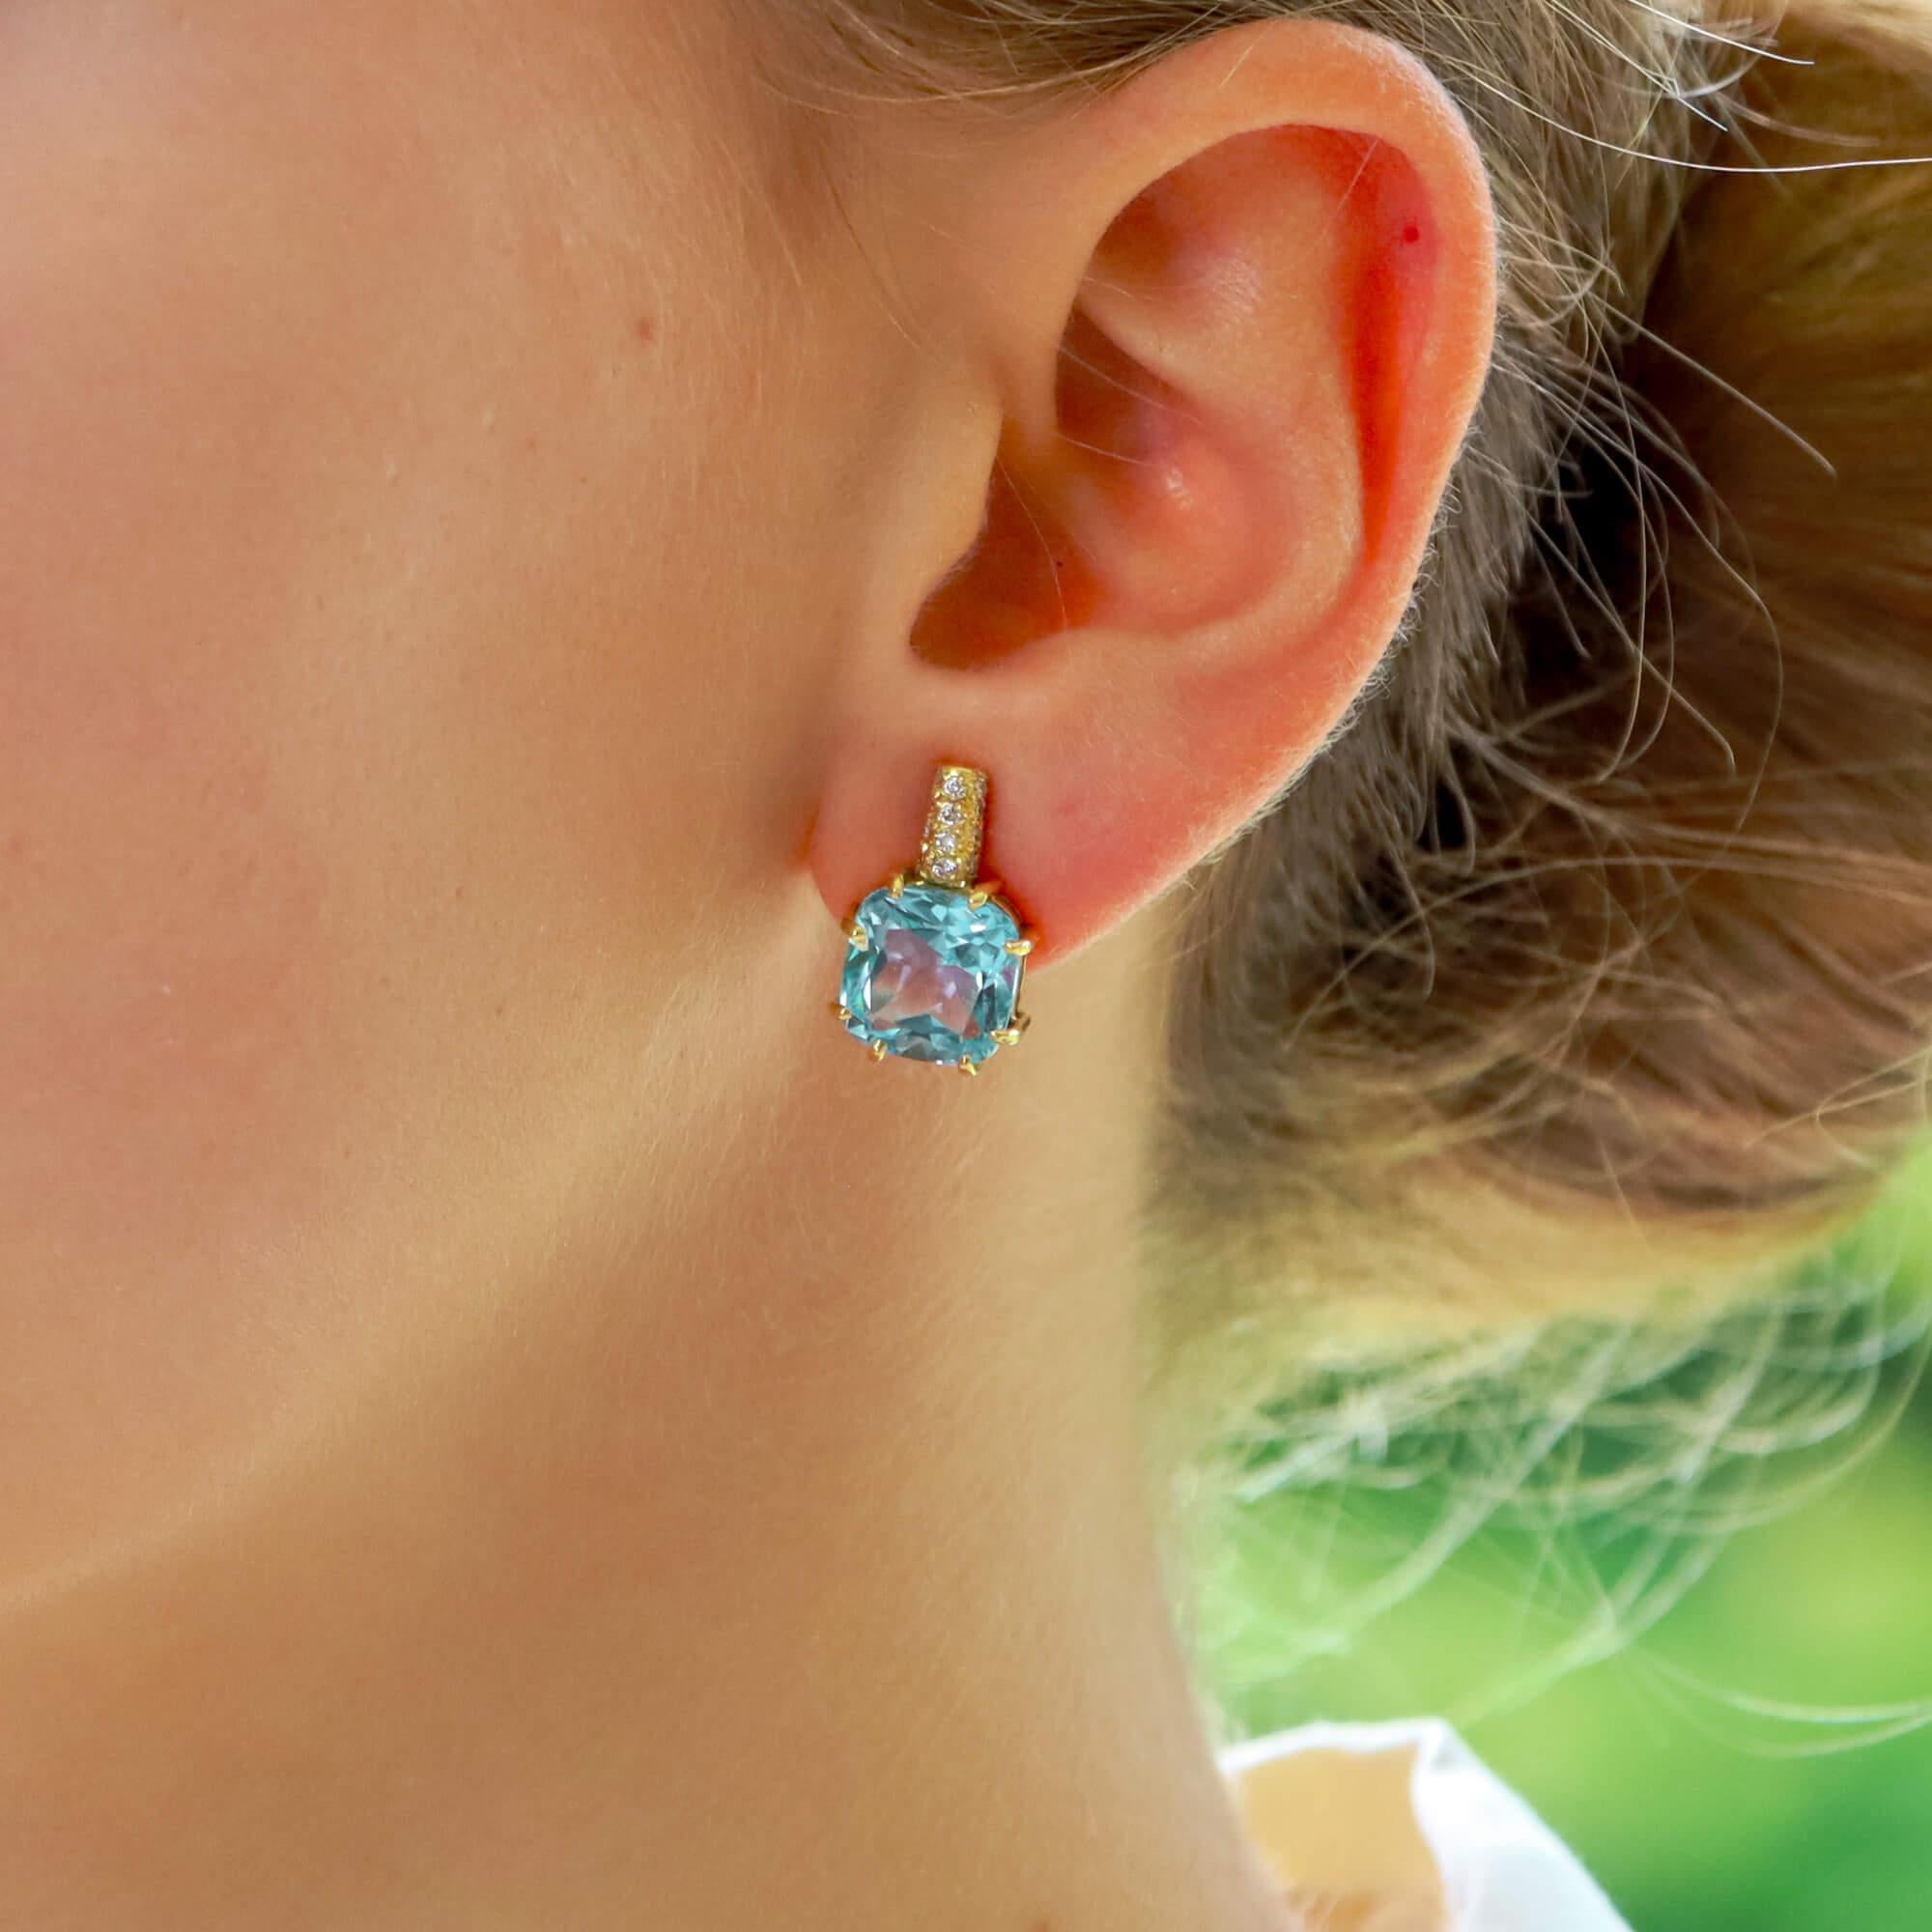 A beautiful vintage pair of Kiki McDonough blue topaz and diamond earrings set in 18k yellow gold.

Each earring is predominantly set with a gorgeous sky-blue coloured cushion cut blue topaz stone, eight claw set securely. To the top is a soldered